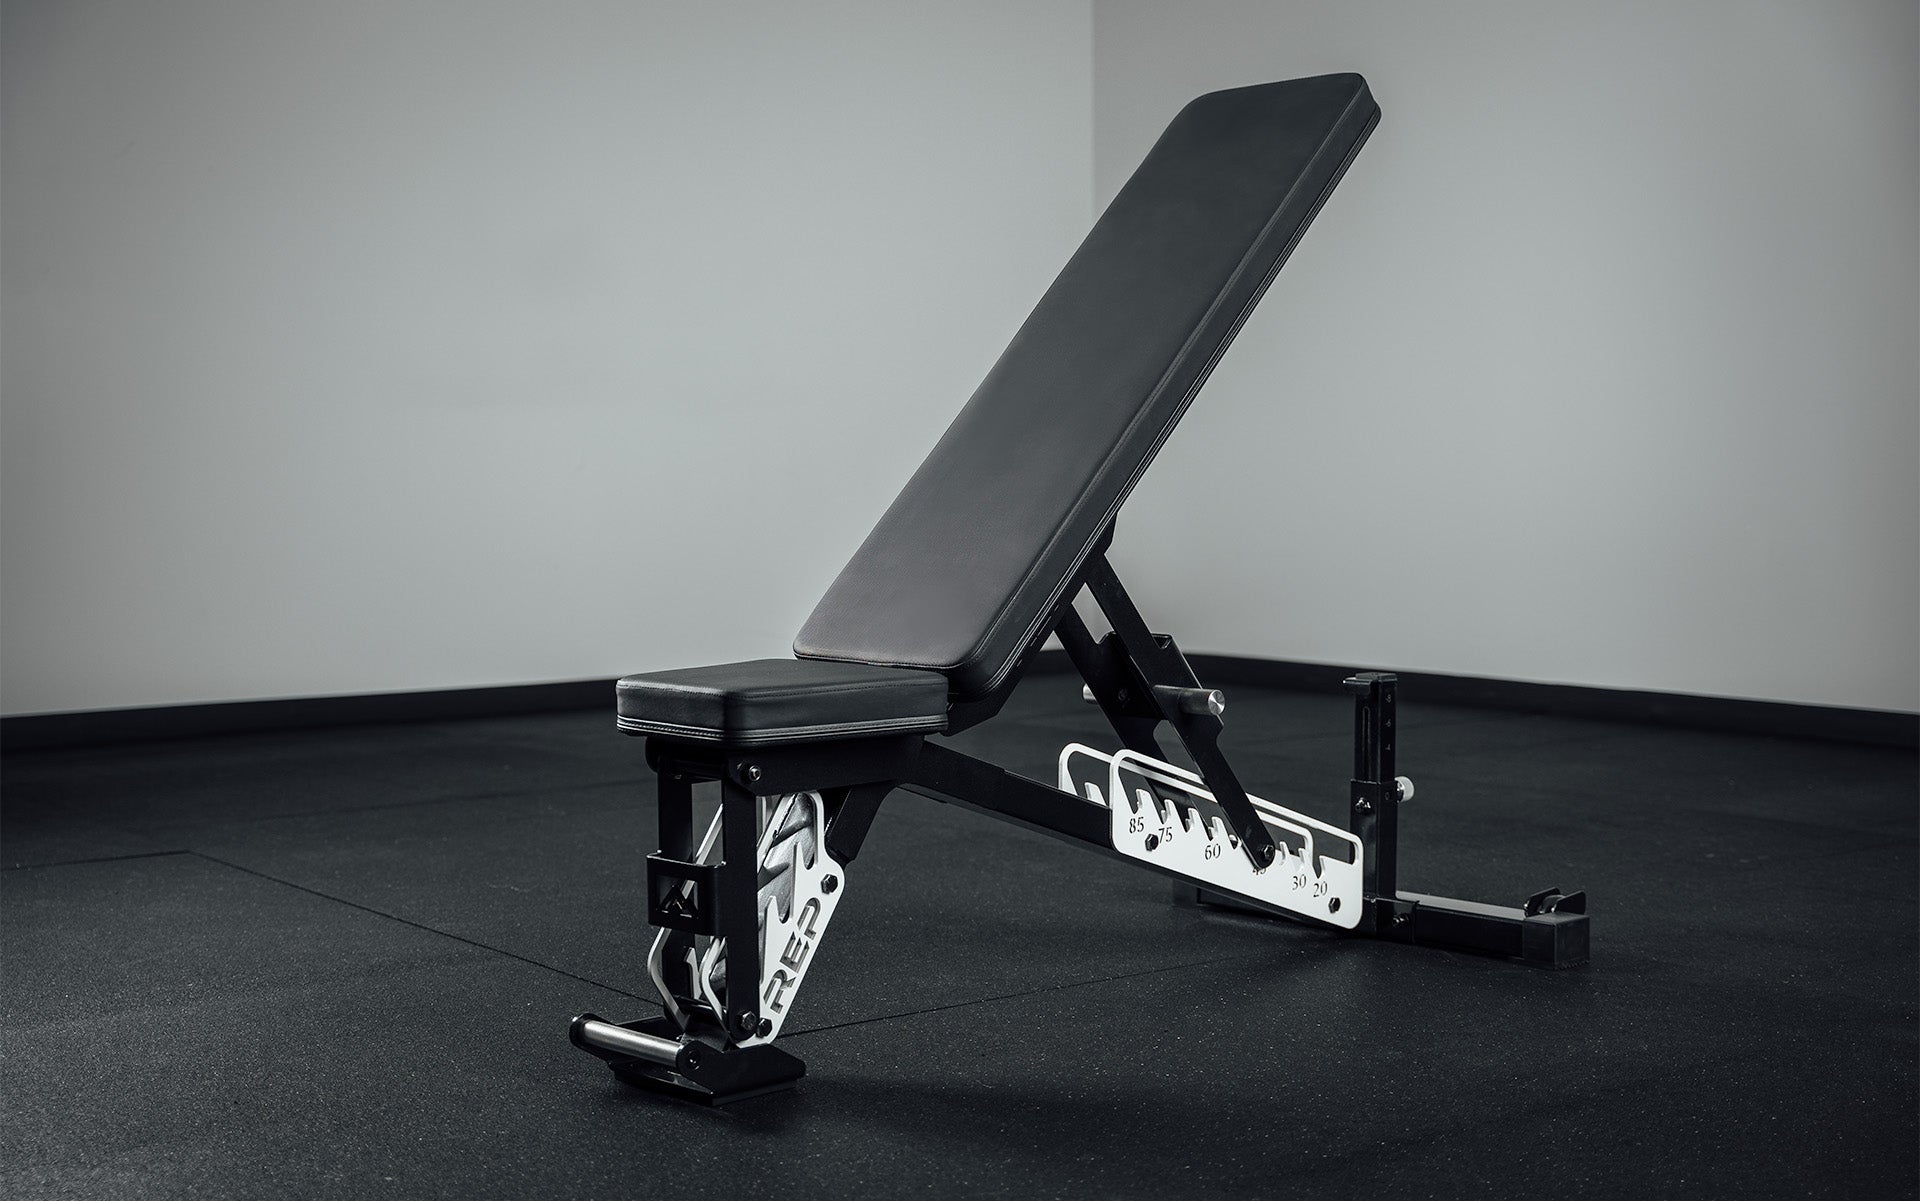 Benefits of an adjustable bench